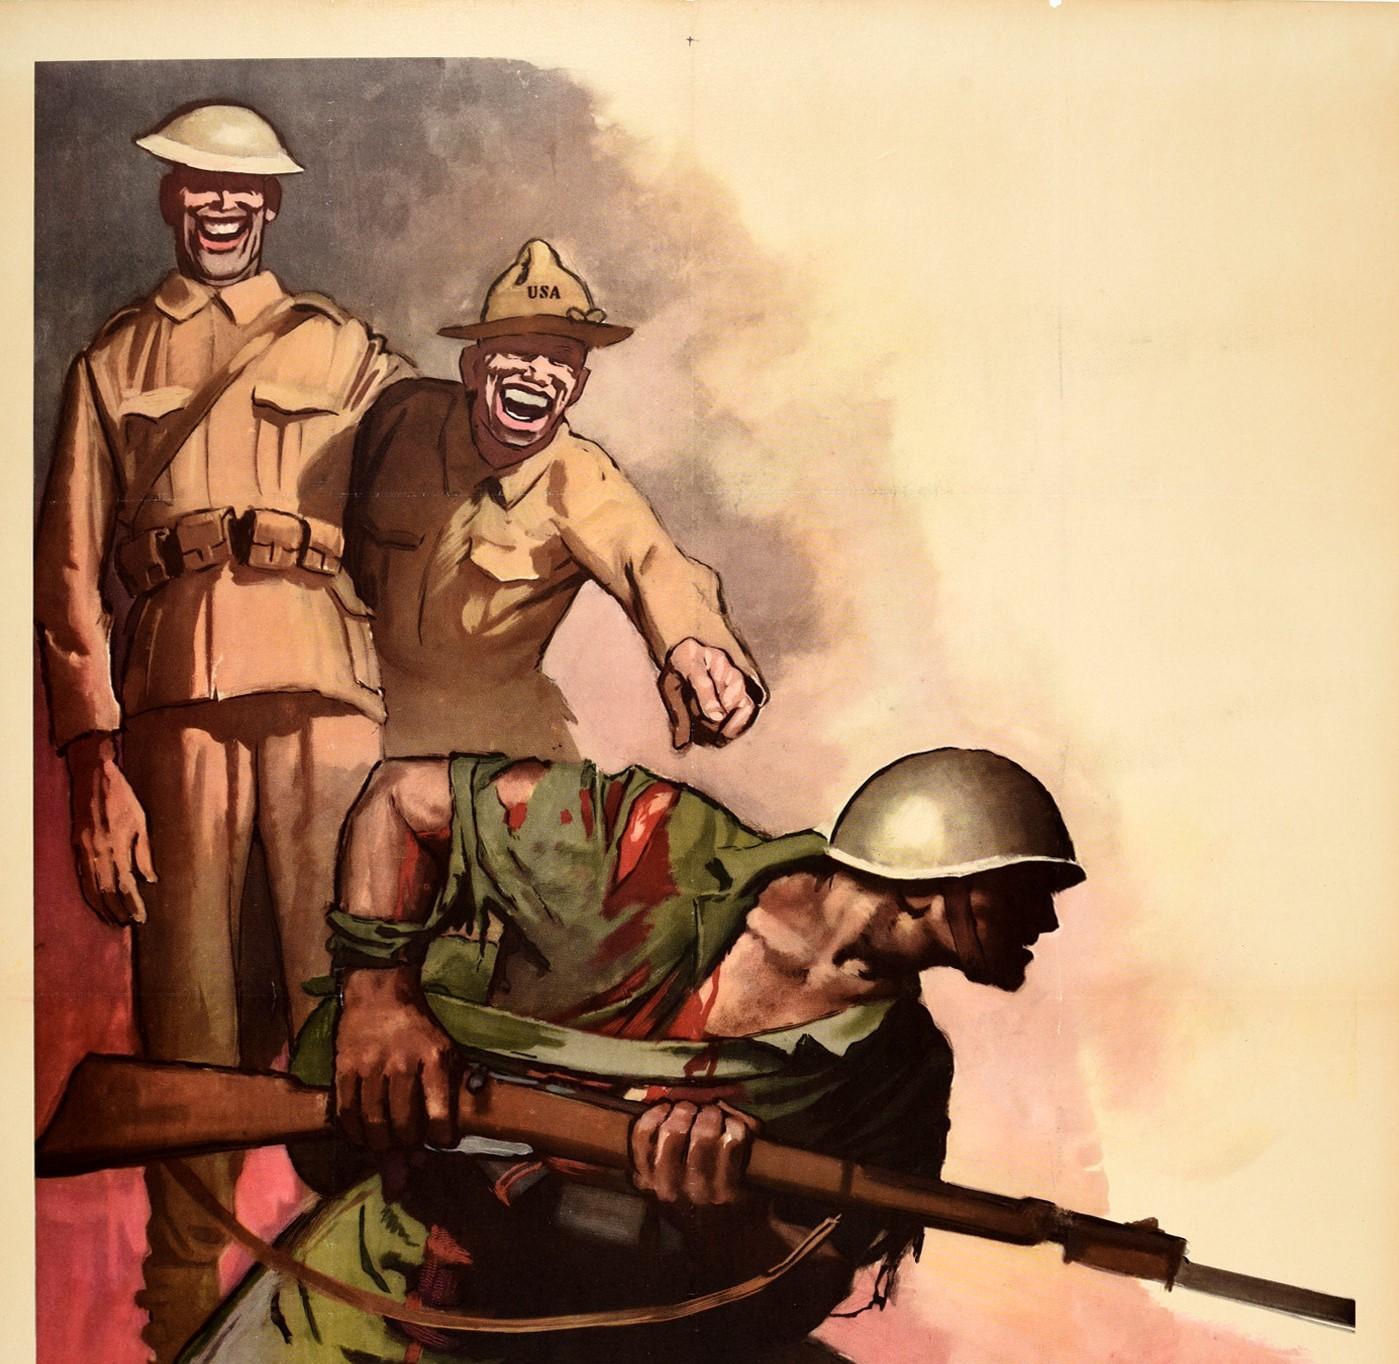 Original vintage fascist Italian World War Two poster - Fratricidio! / Fratricide - featuring an Italian soldier wearing a torn and bloodied uniform and holding his rifle gun forward as he moves forward on his knees in front of two characters in